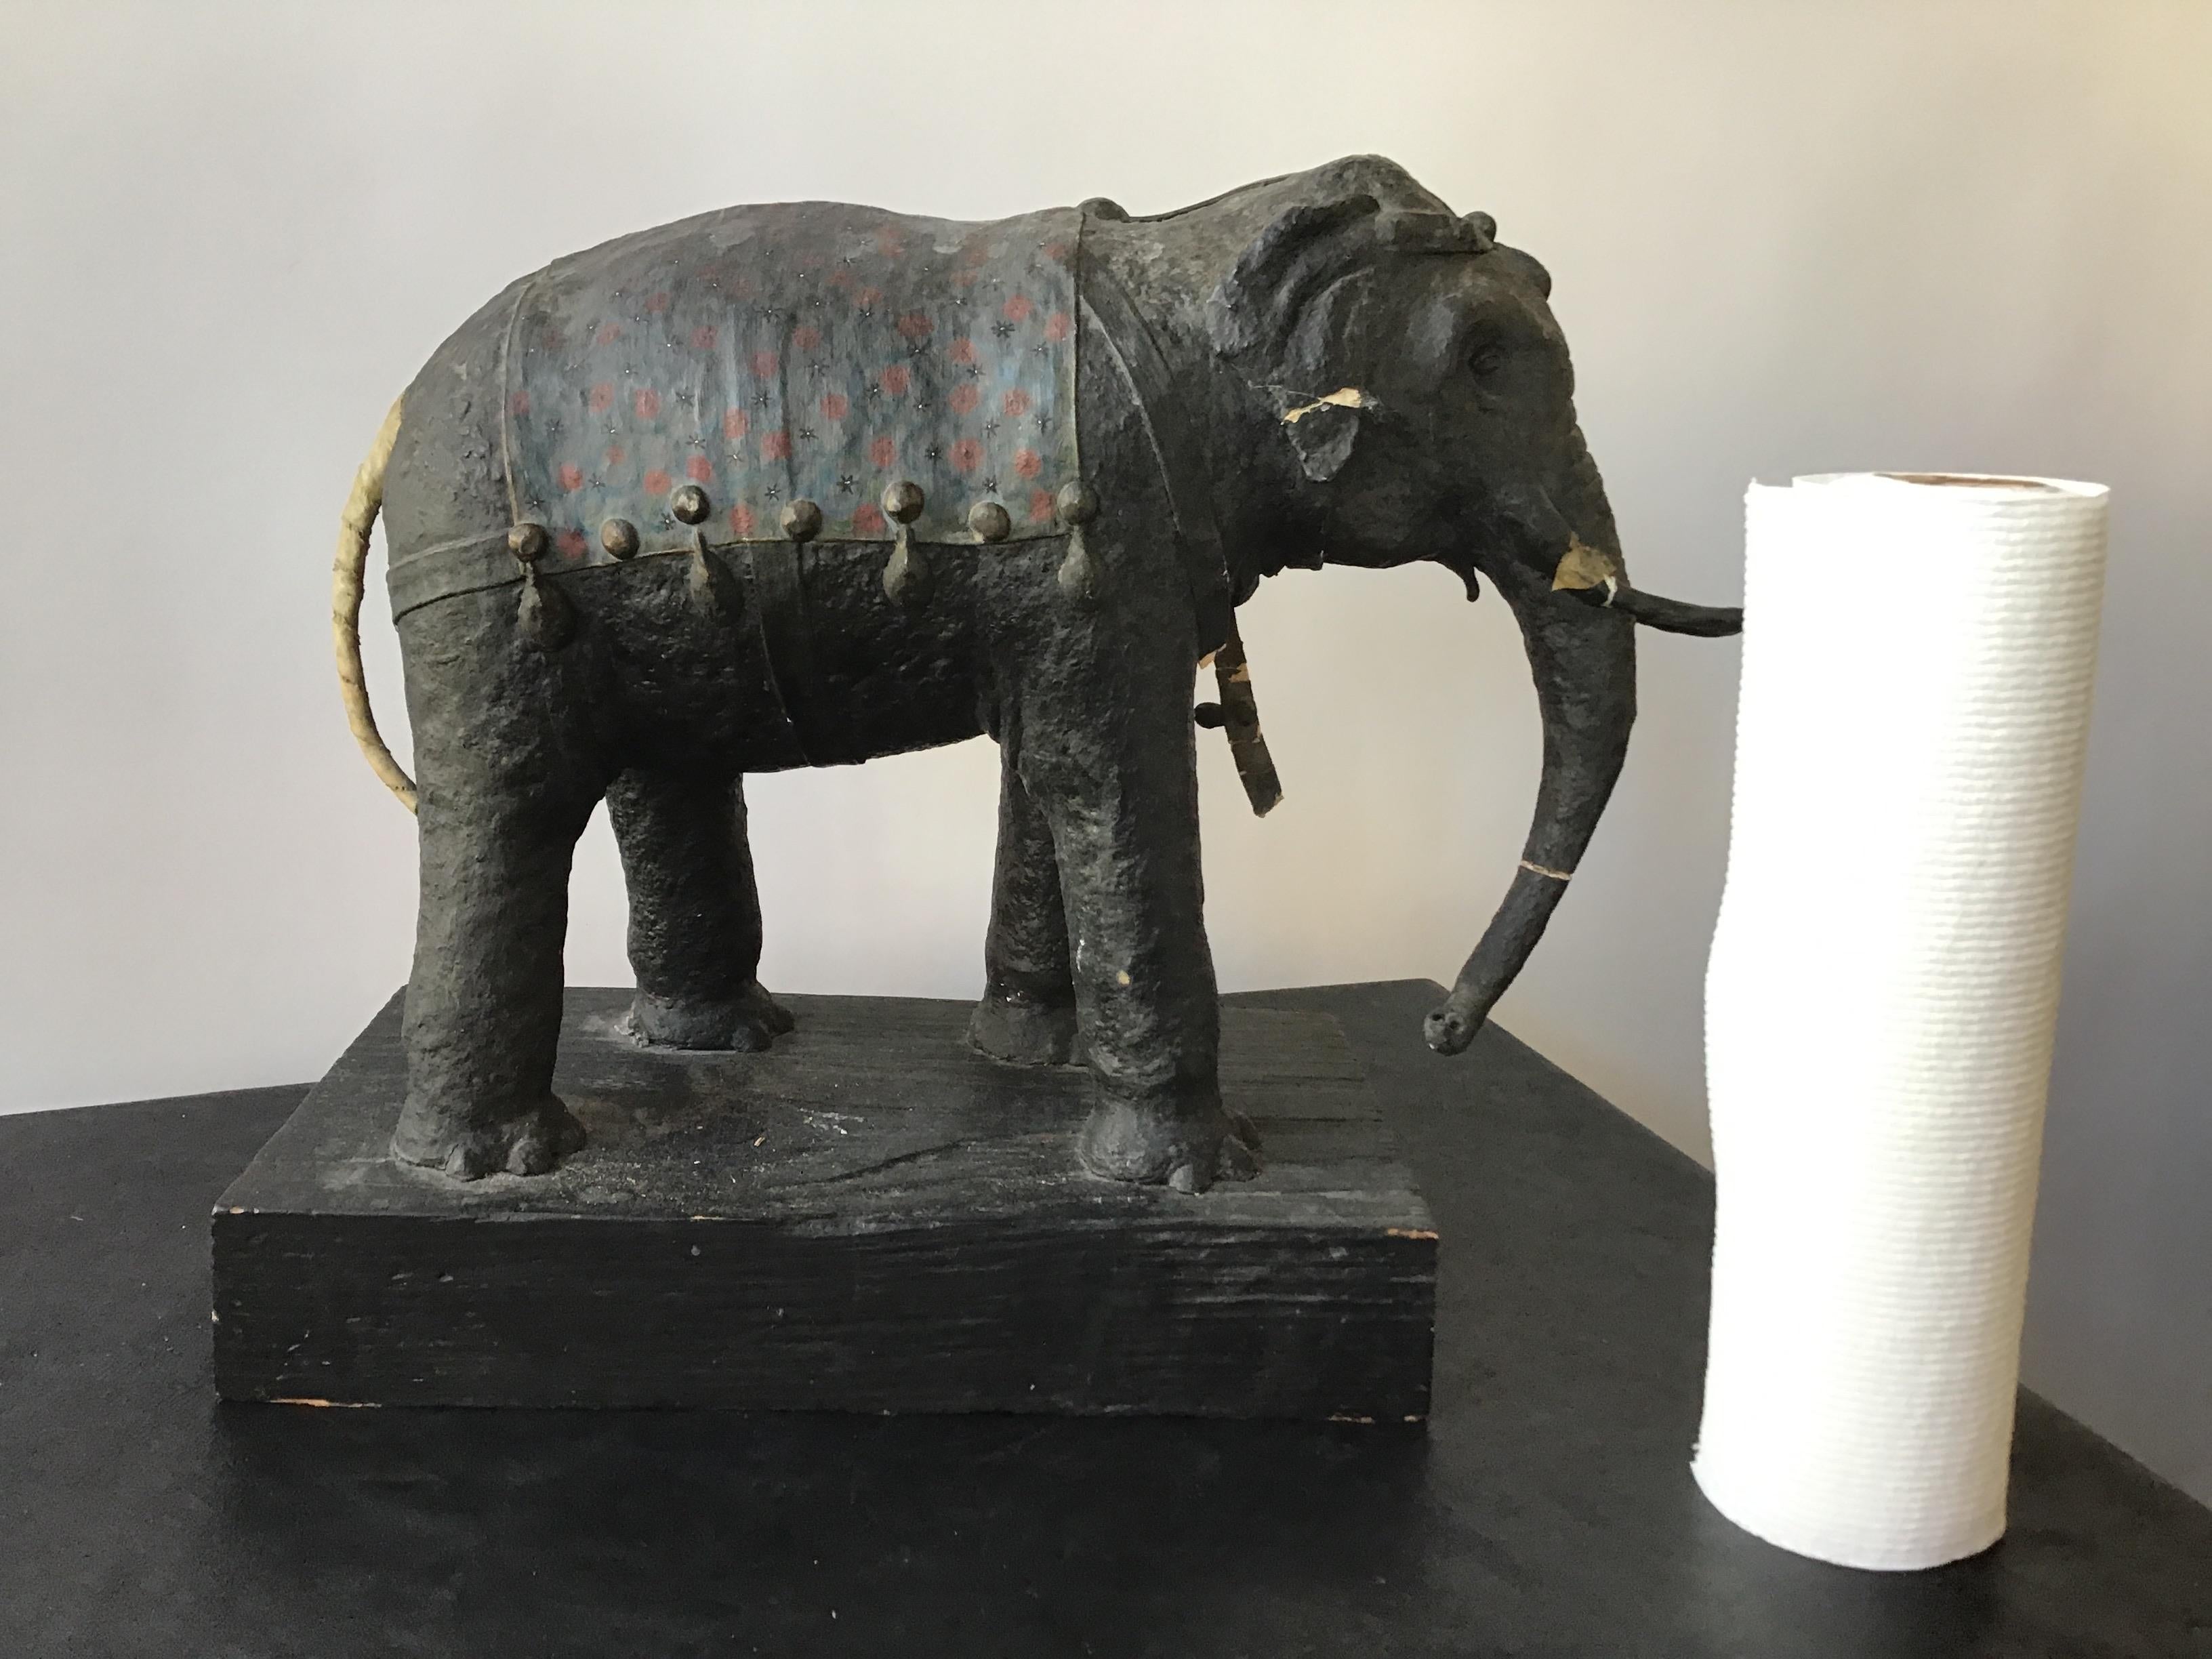 1930s papier mâché elephant on wood base. Some damage to elephant as shown in pictures.